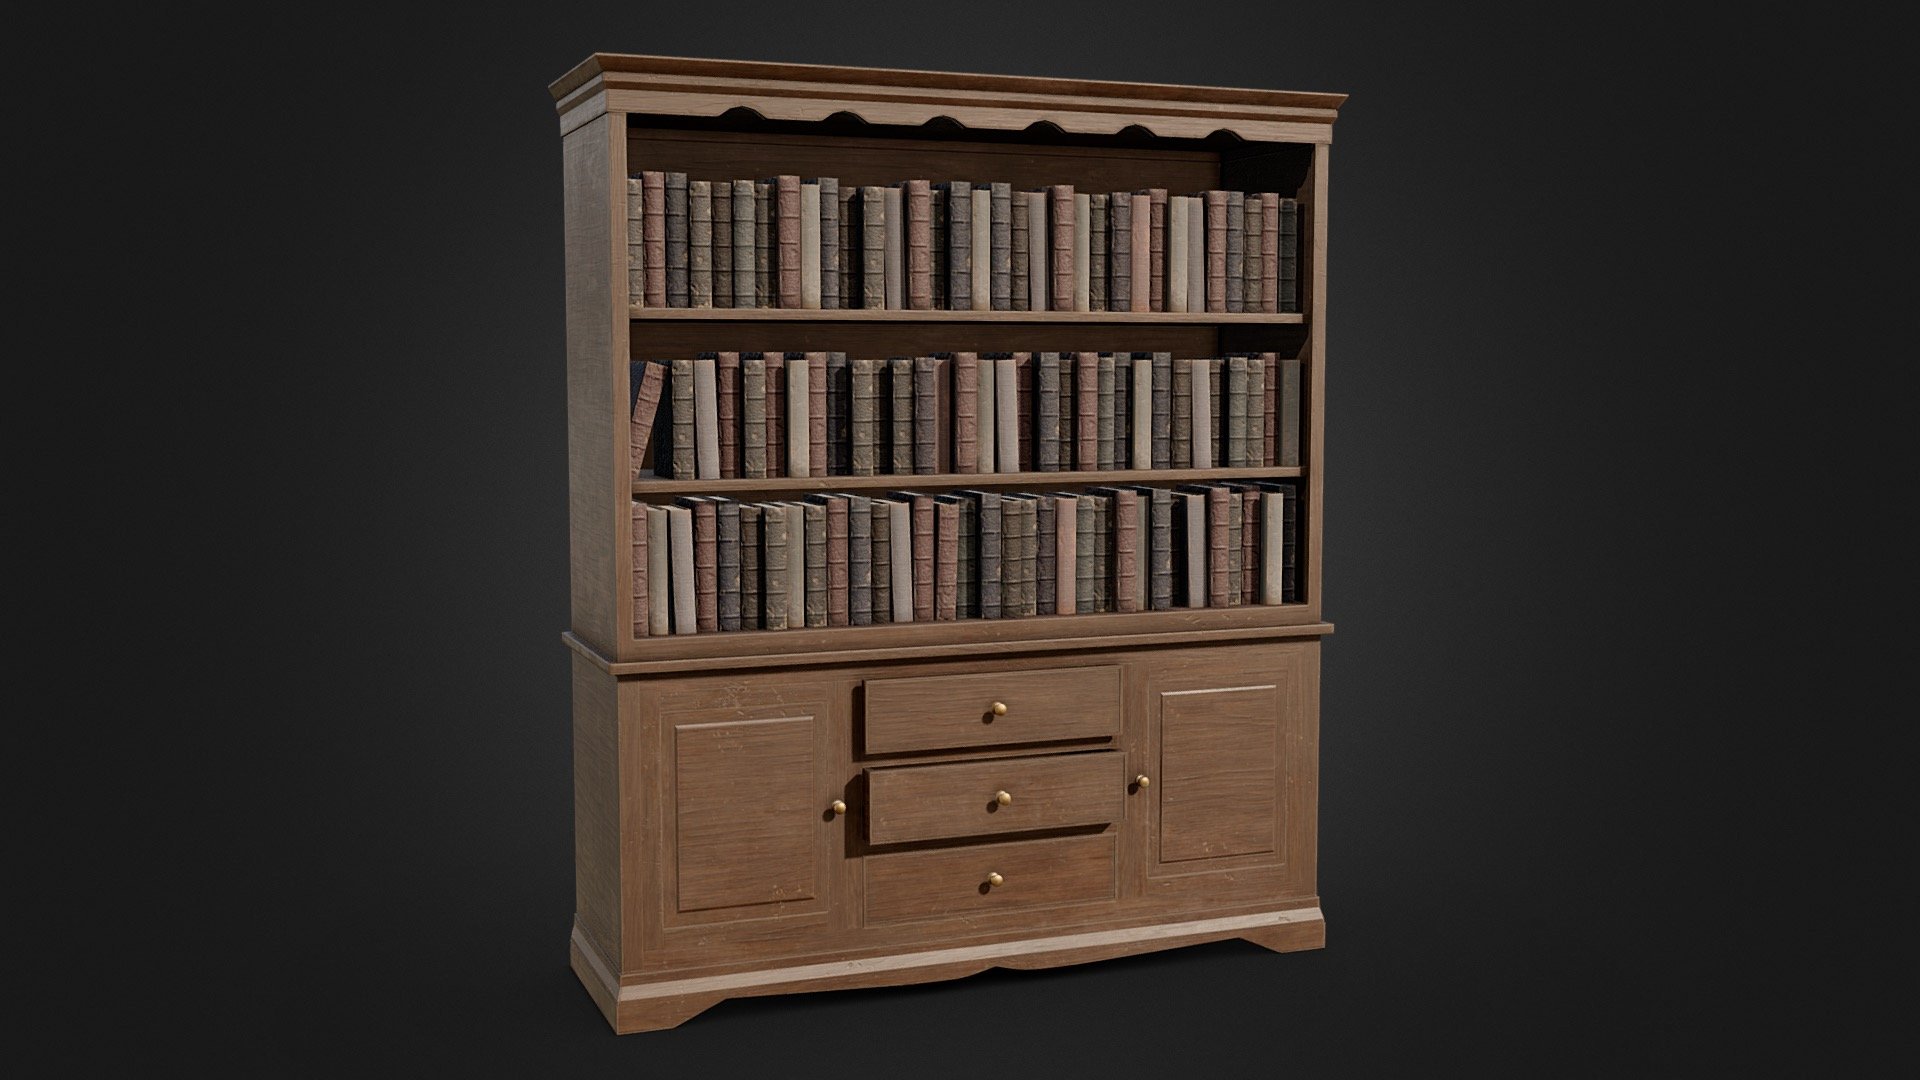 A low-poly, game ready antique bookcase with cabinets. The model will look great in any old environment and is suitable for use in game, VR, archviz and visual production.

This model is included in the Victorian Bookcase Collection on Sketchfab.

Features




Model includes an antique bookcase with draws, cabinets, and books. The cabinets and draws can be opened and closed

Model is low-poly and optimised for use in game, VR, archviz, and visual production.

Clean topology. Objects are grouped, named appropriately and unwrapped.

Modelled in Blender and textured in Substance Painter.

9,922 triangle count; 5,874 vertices.

Textures

Model has 1 PBR texture set. Textures are in .png at 4096x4096 and includes: Base Colour, Metallic, Roughness, Normal 3d model